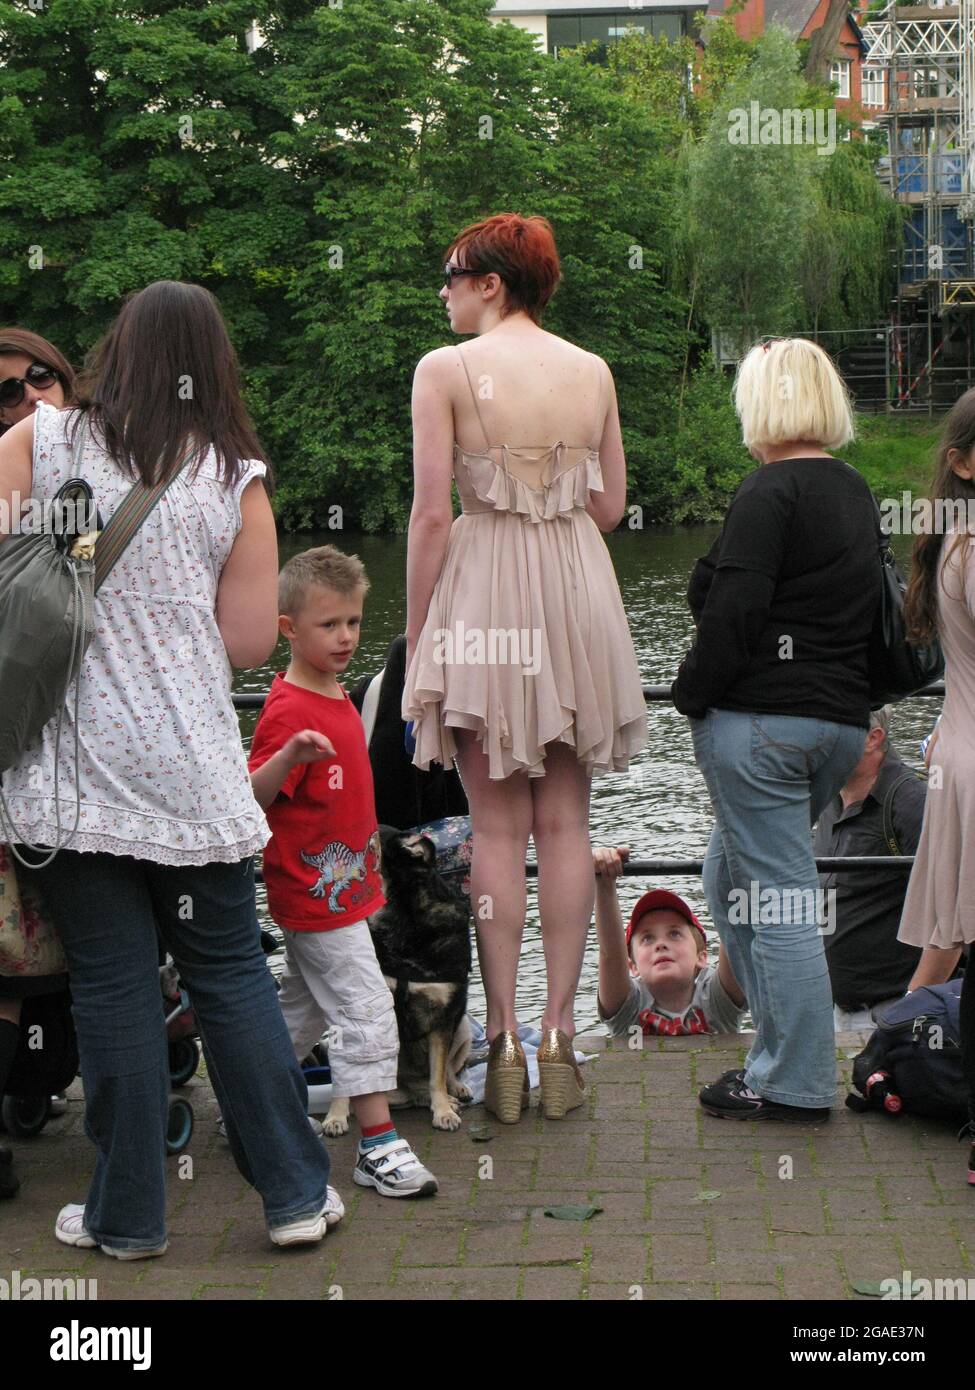 A tall young red-headed woman on the riverside at Chester, Cheshire, England. She wears a stylish short dress and high heels. She has a dog on a lead Stock Photo